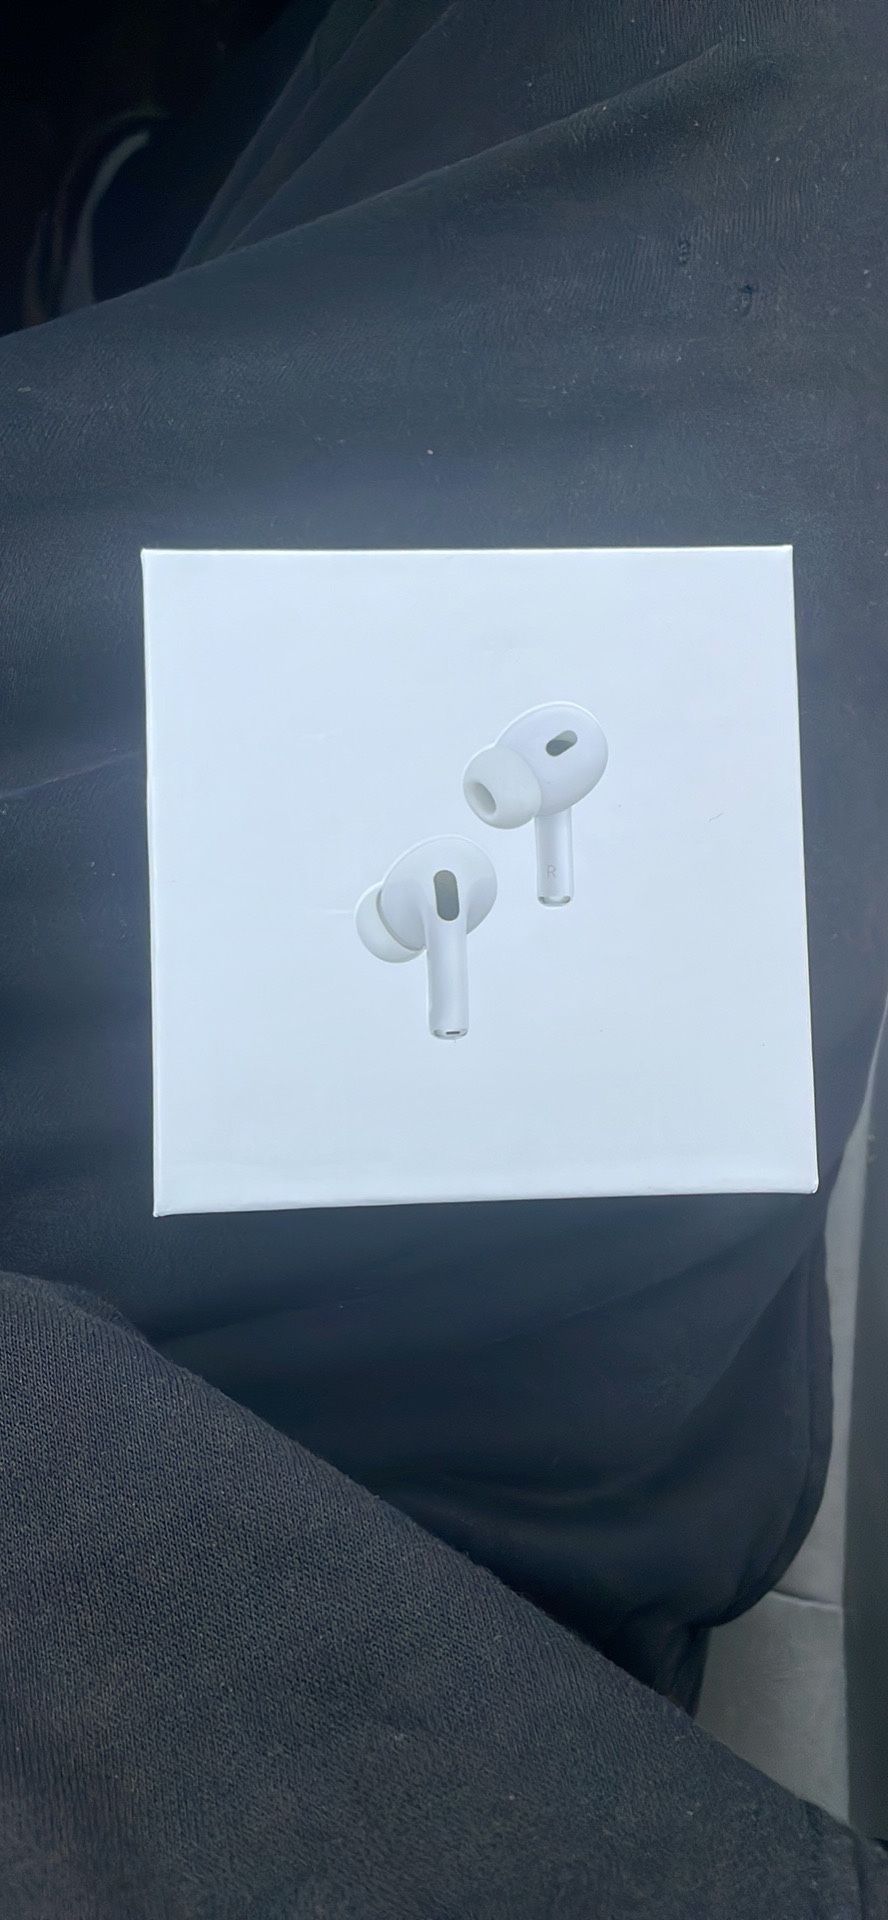 Apple Airpod Pros(2nd Generations)